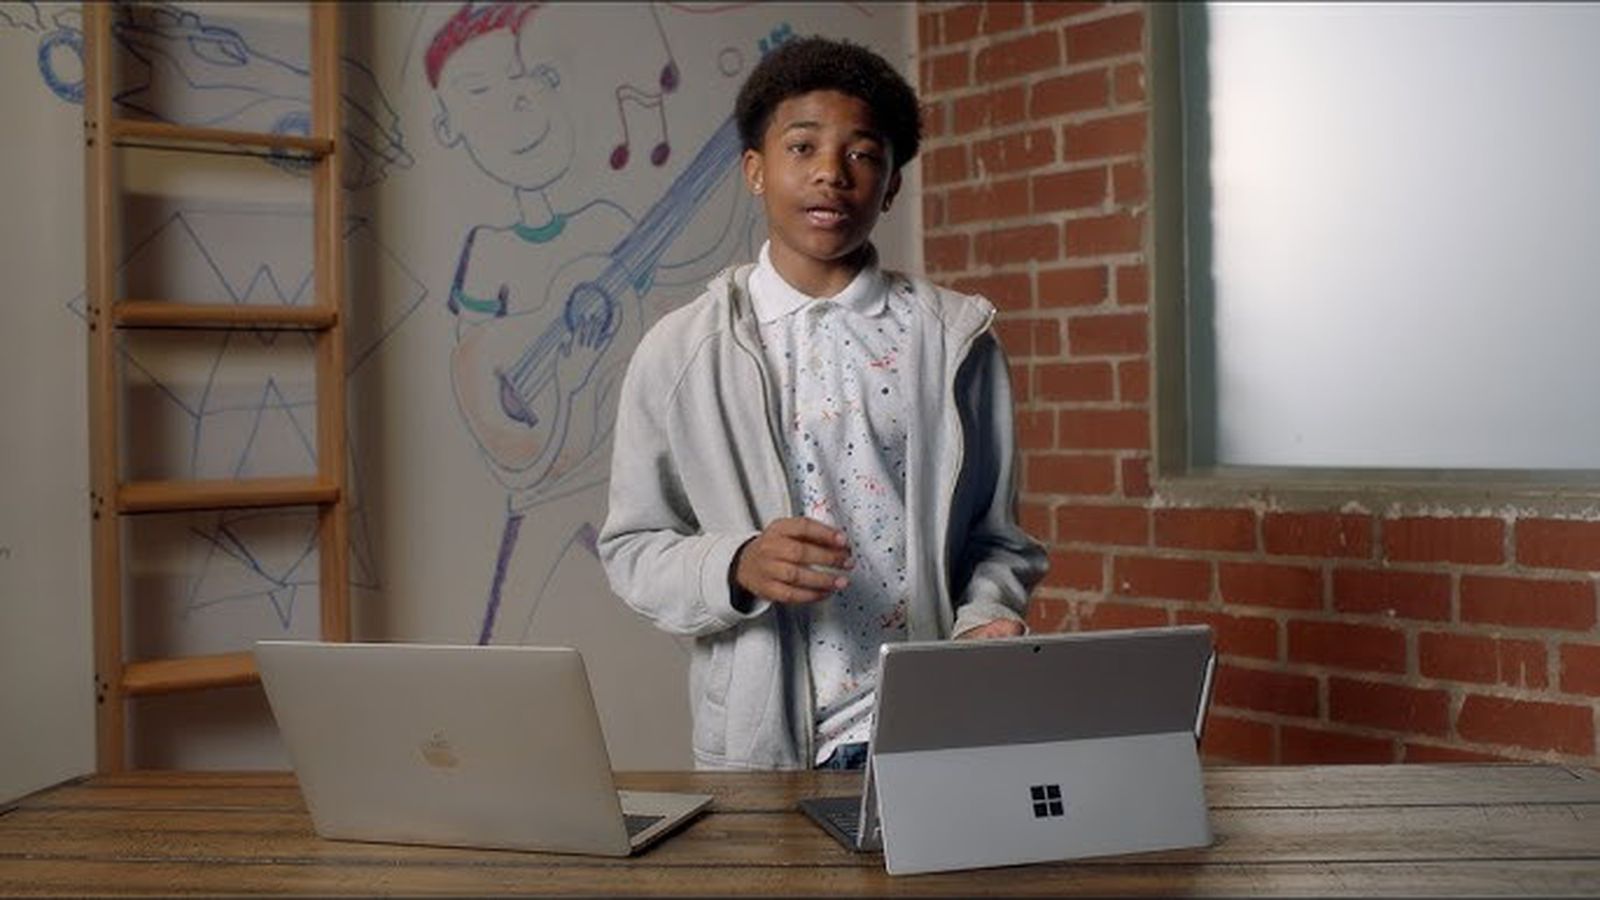 Microsoft names Surface Pro 7 as ‘the better choice’ over MacBook Pro in new ad